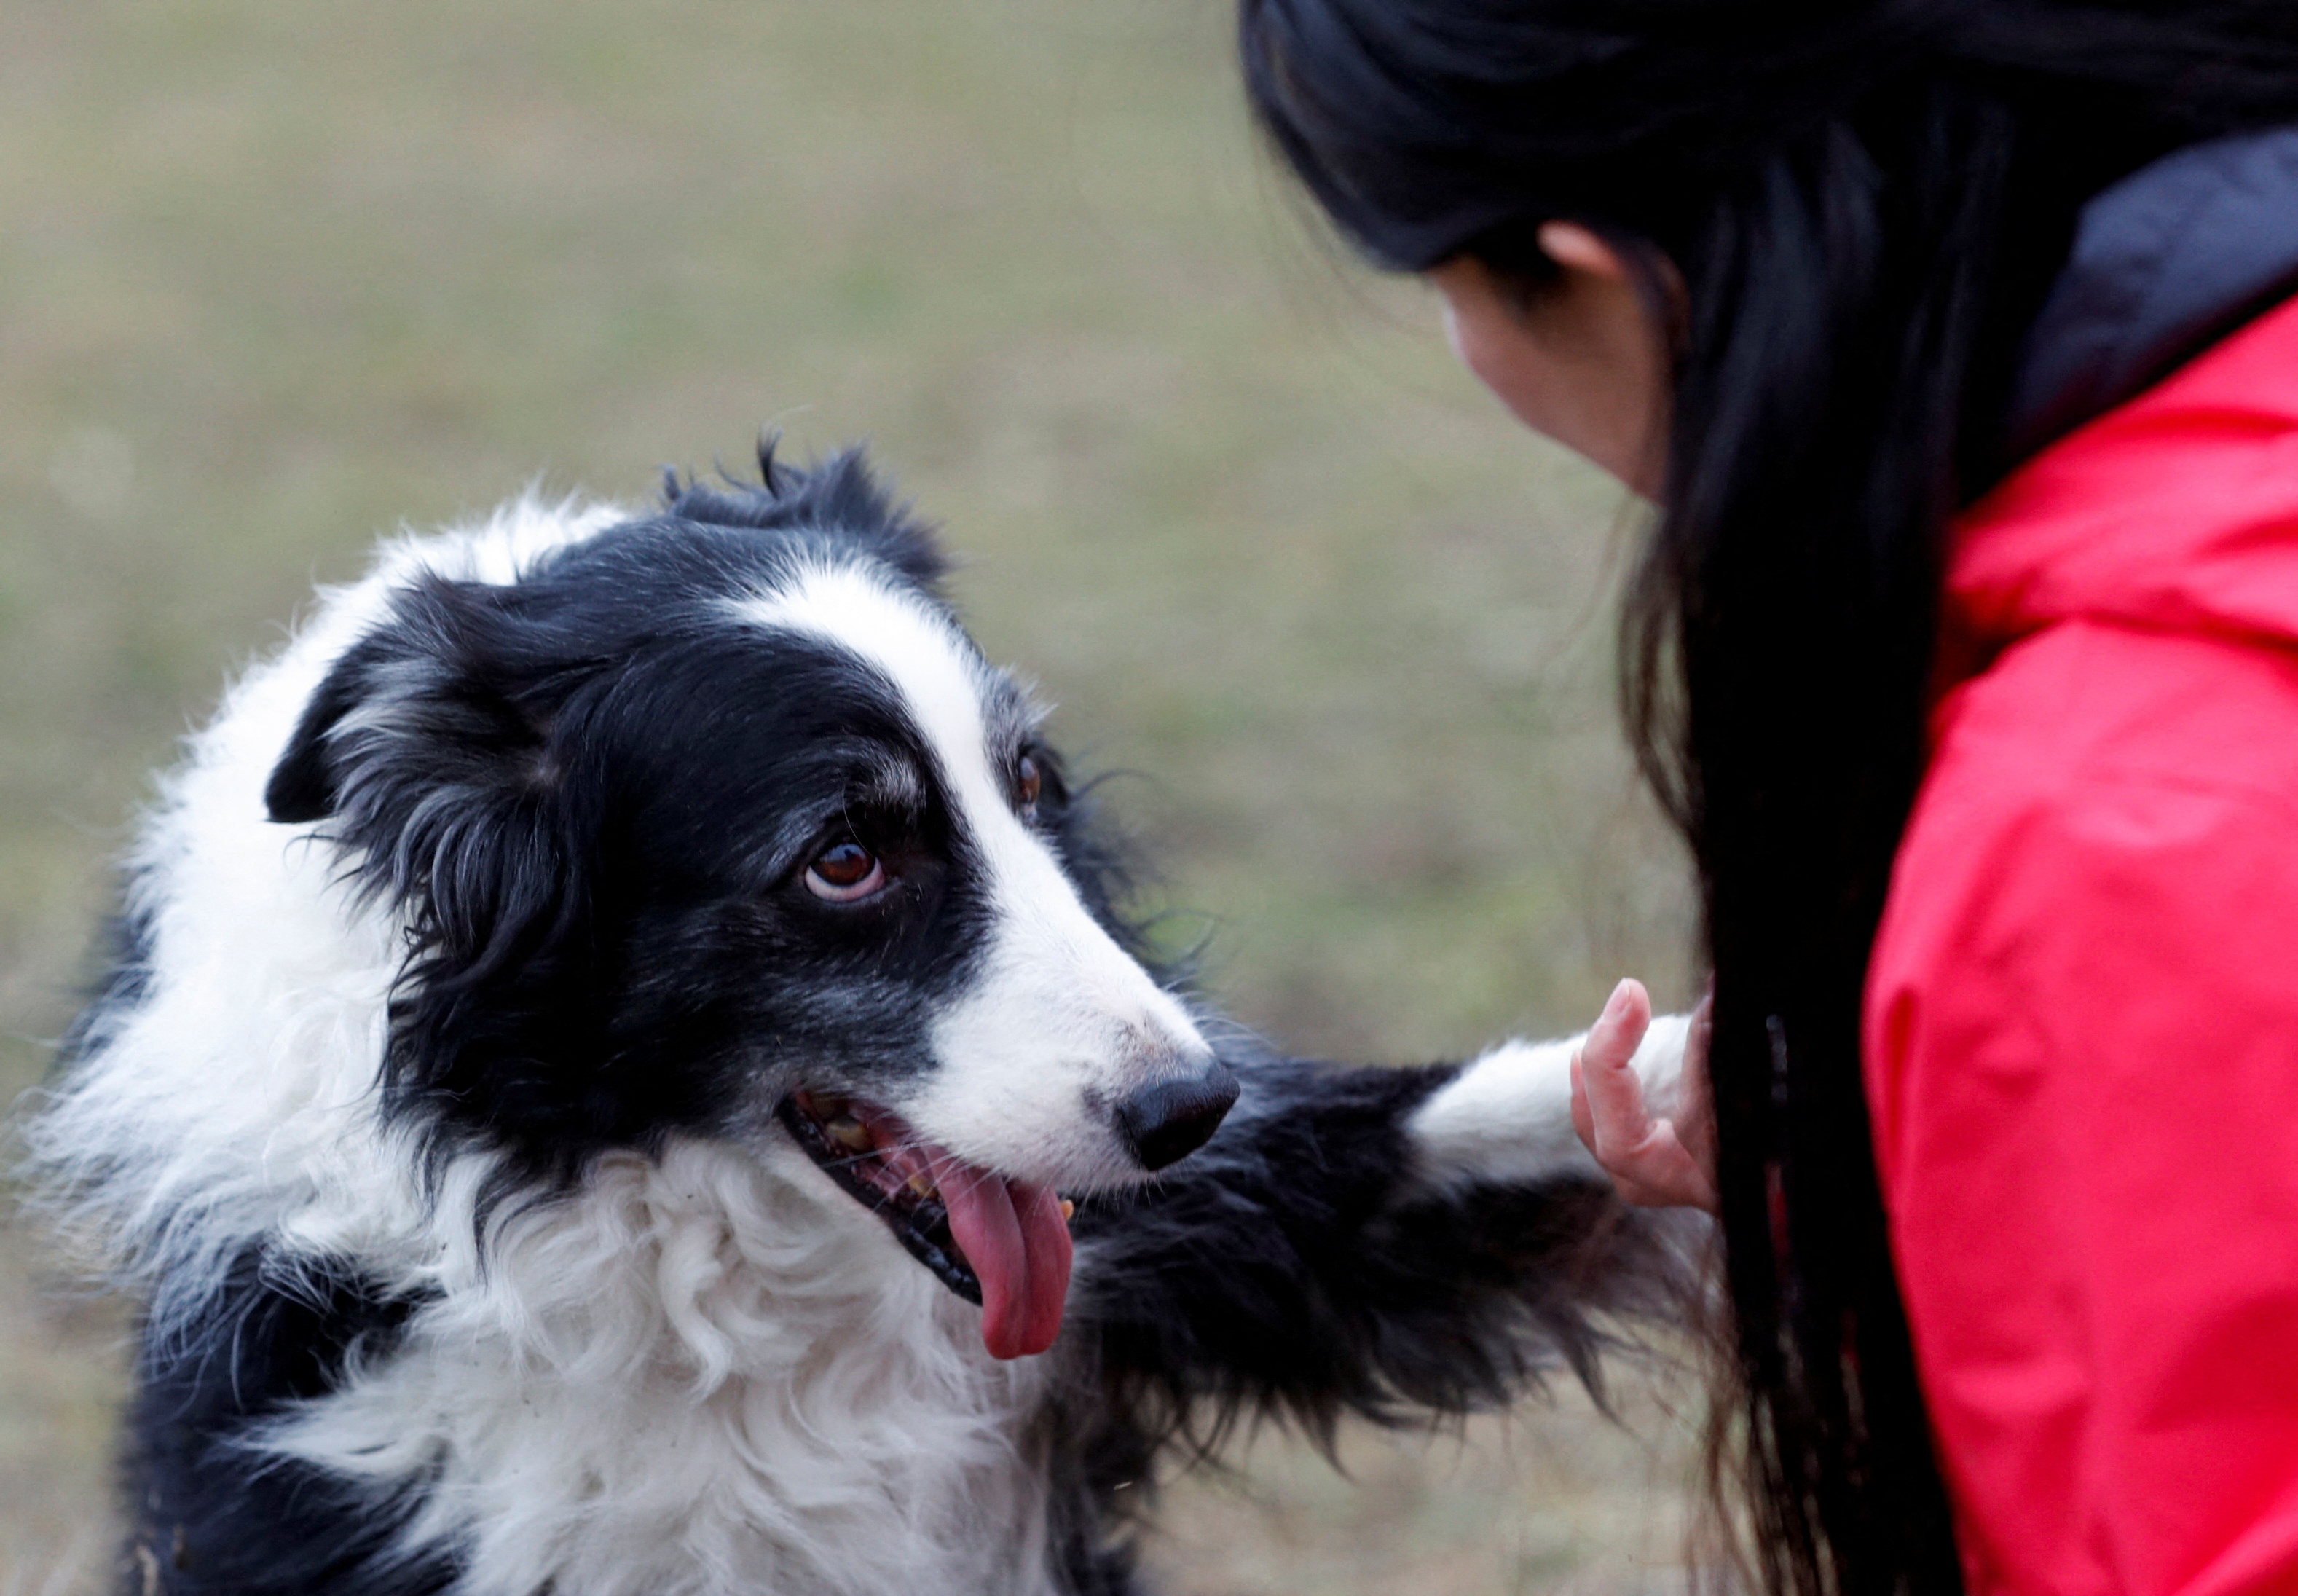 Kun-kun, an 8-year-old Border Collie, looks at his owner, postdoctoral researcher Laura V. Cuaya, at the Ethology Department of the Eotvos Lorand University in Budapest, Hungary, January 5, 2022. REUTERS/Bernadett Szabo